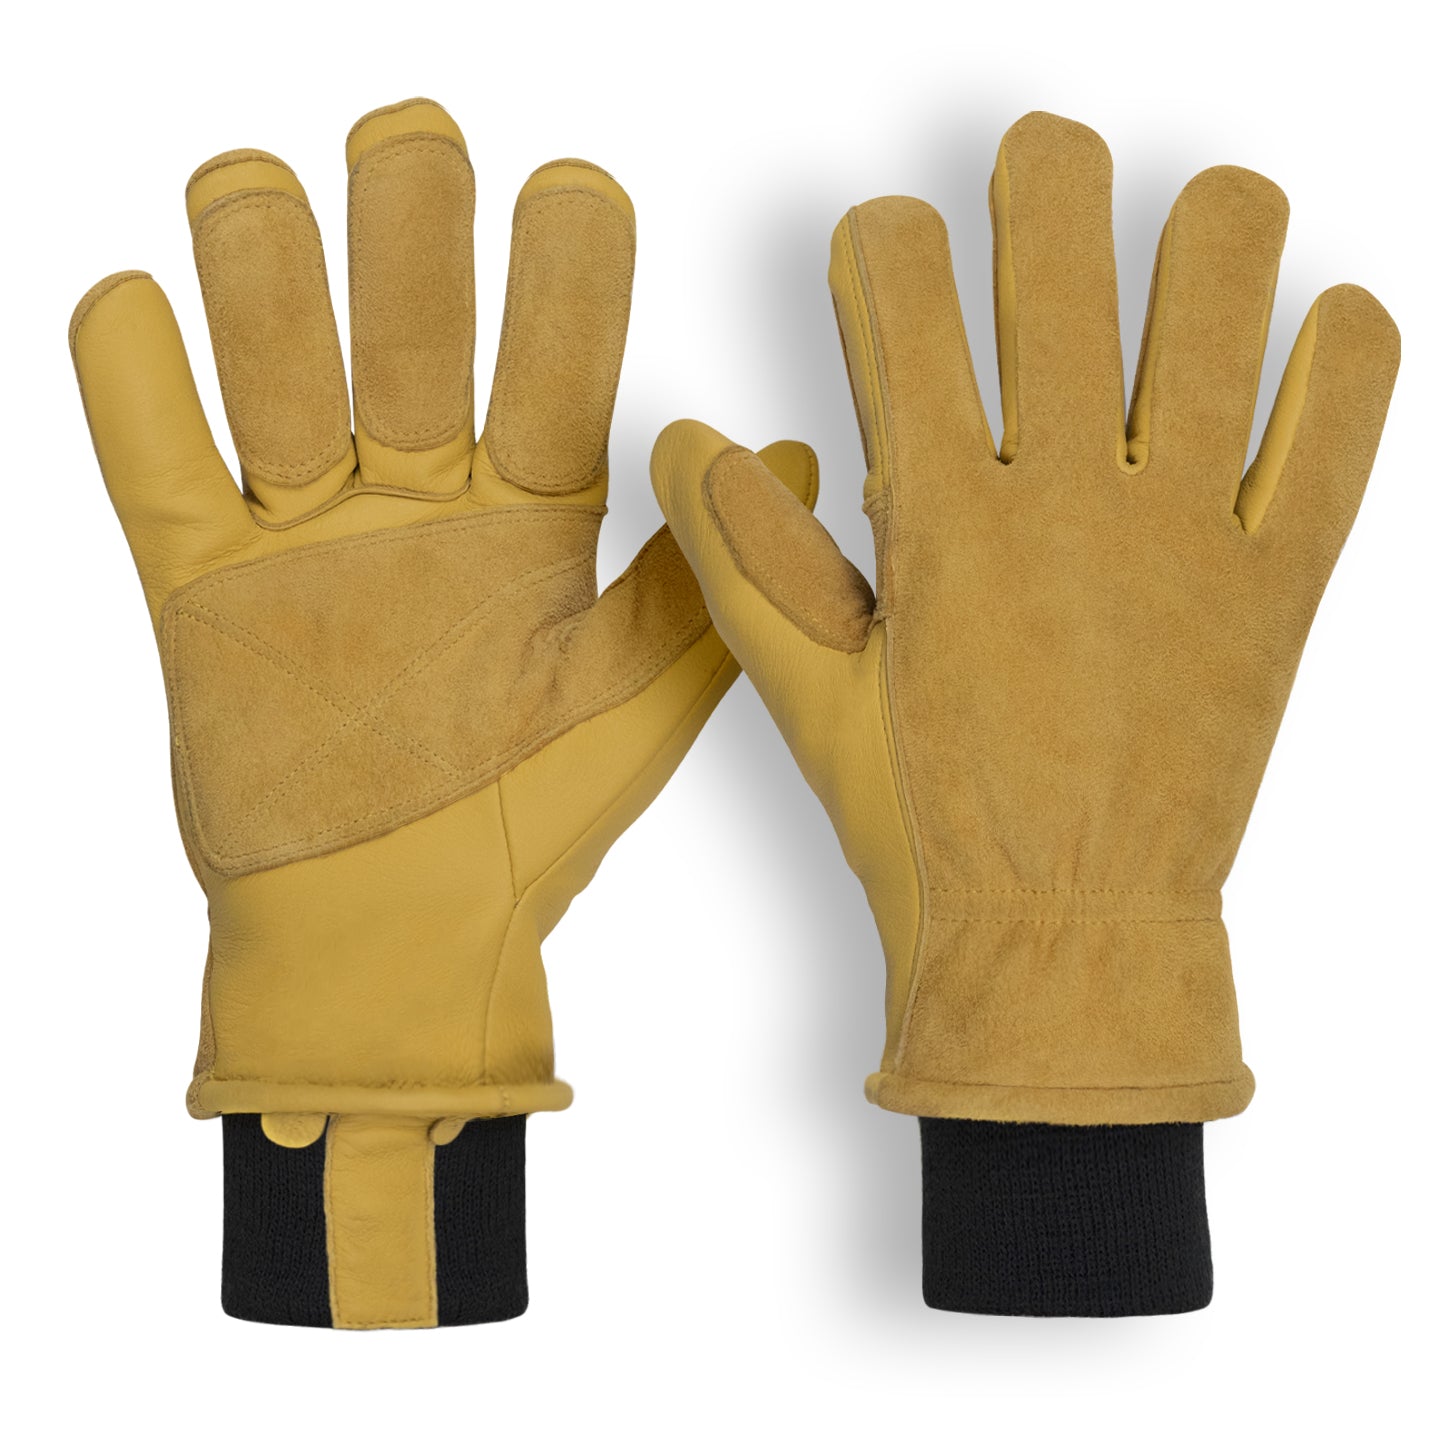 Guide Gear Mens Deerskin Leather Work Gloves Insulated, Thinsulate 40 Gram  